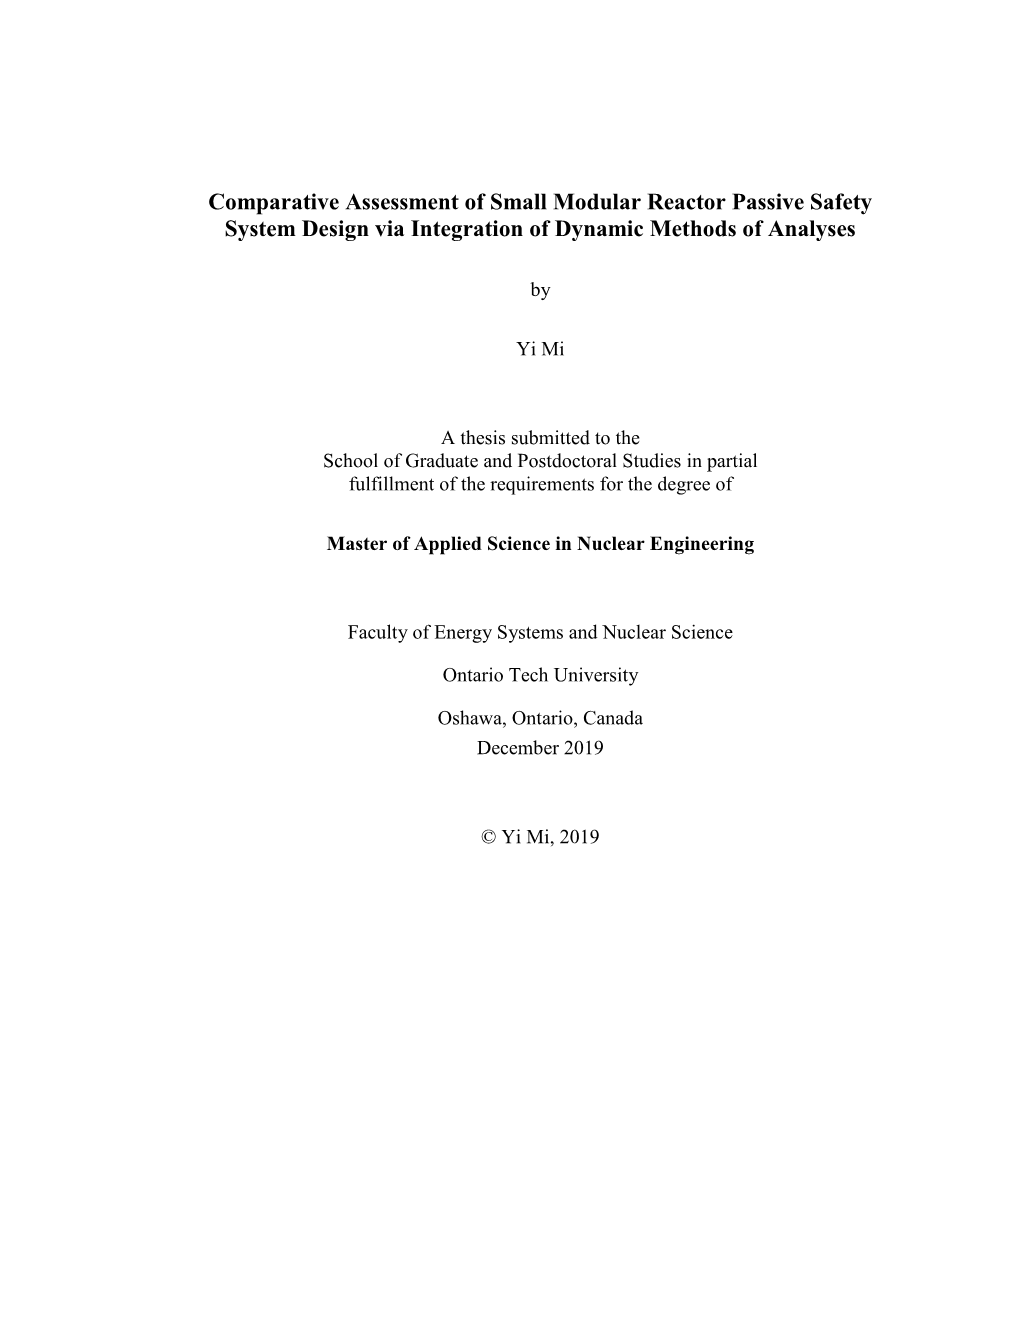 Comparative Assessment of Small Modular Reactor Passive Safety System Design Via Integration of Dynamic Methods of Analyses